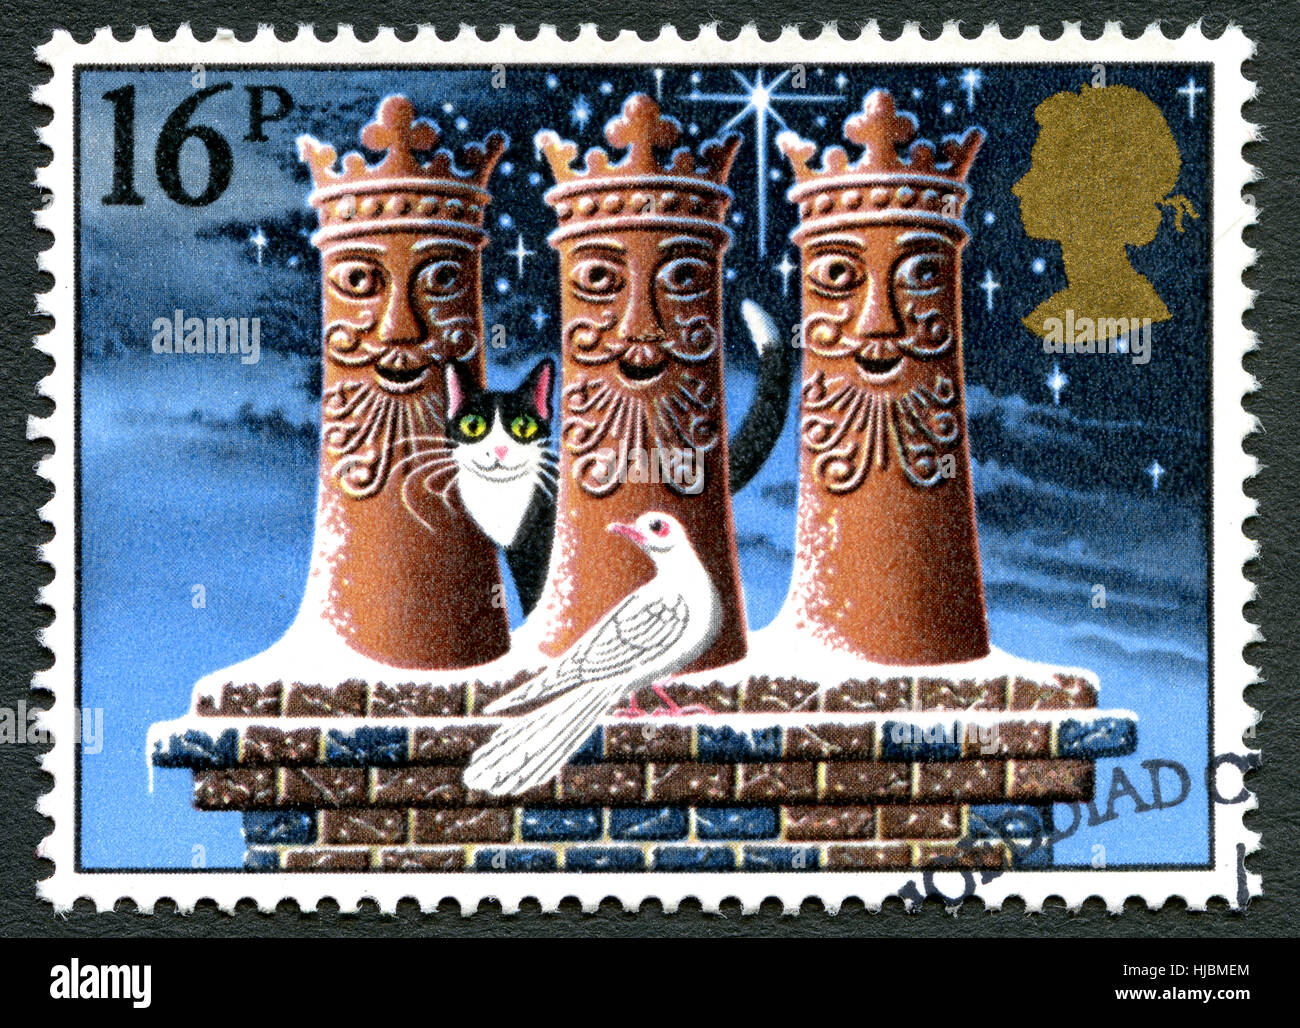 GREAT BRITAIN - CIRCA 1983: A used postage stamp from the UK, depicting a festive illustration of a cat and dove on a rooftop with Chimneys, circa 198 Stock Photo